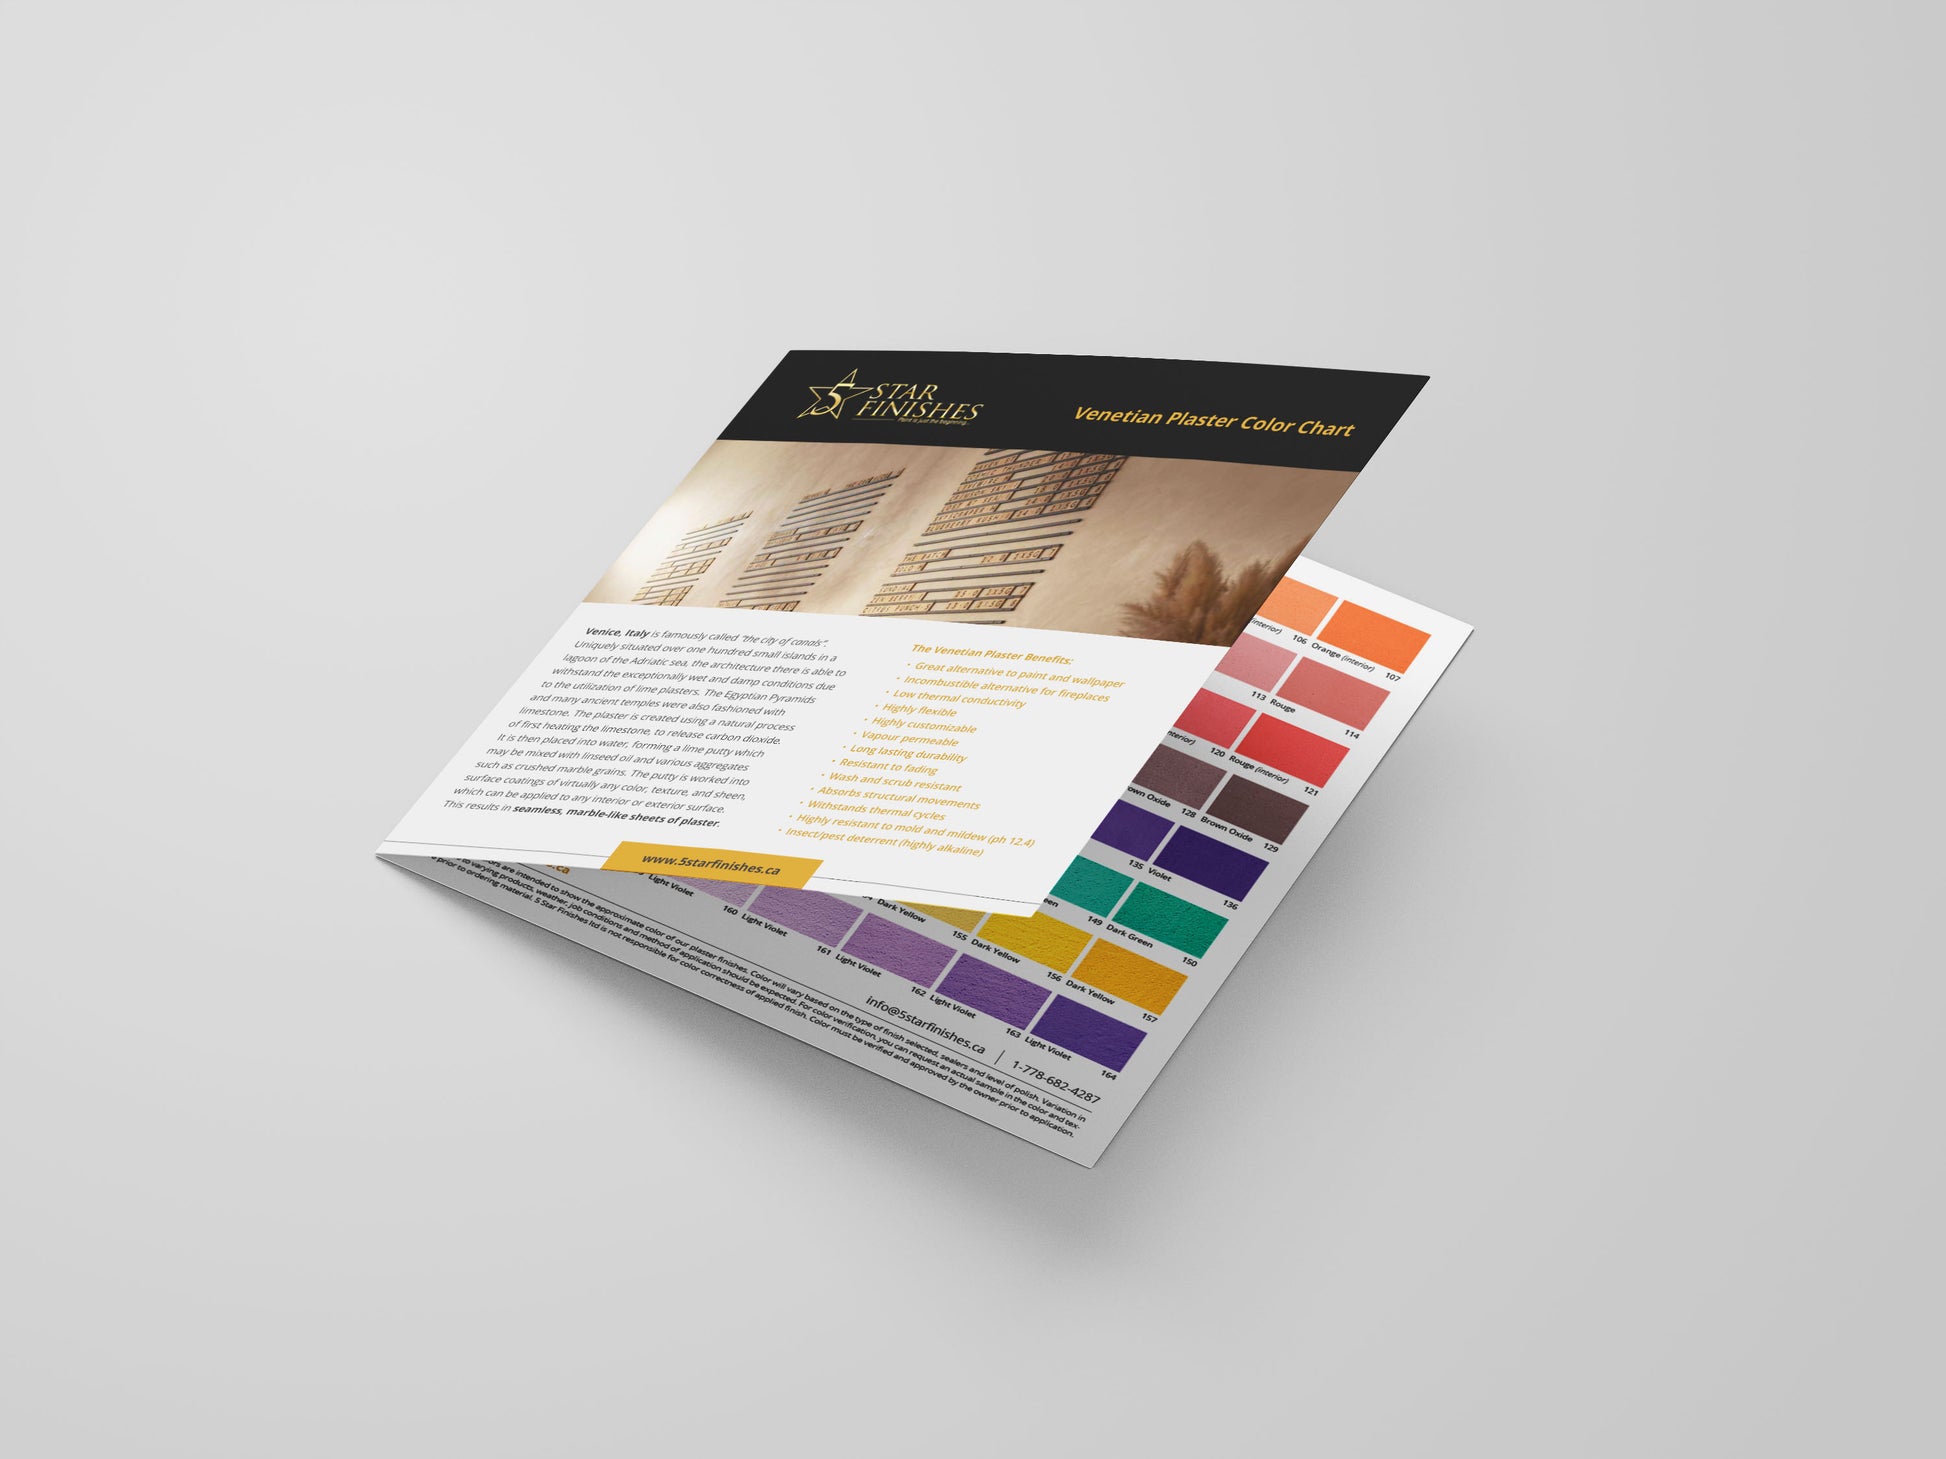 Decorative Venetian Plaster and Microcement Color Chart - 5 Star Finishes Ltd